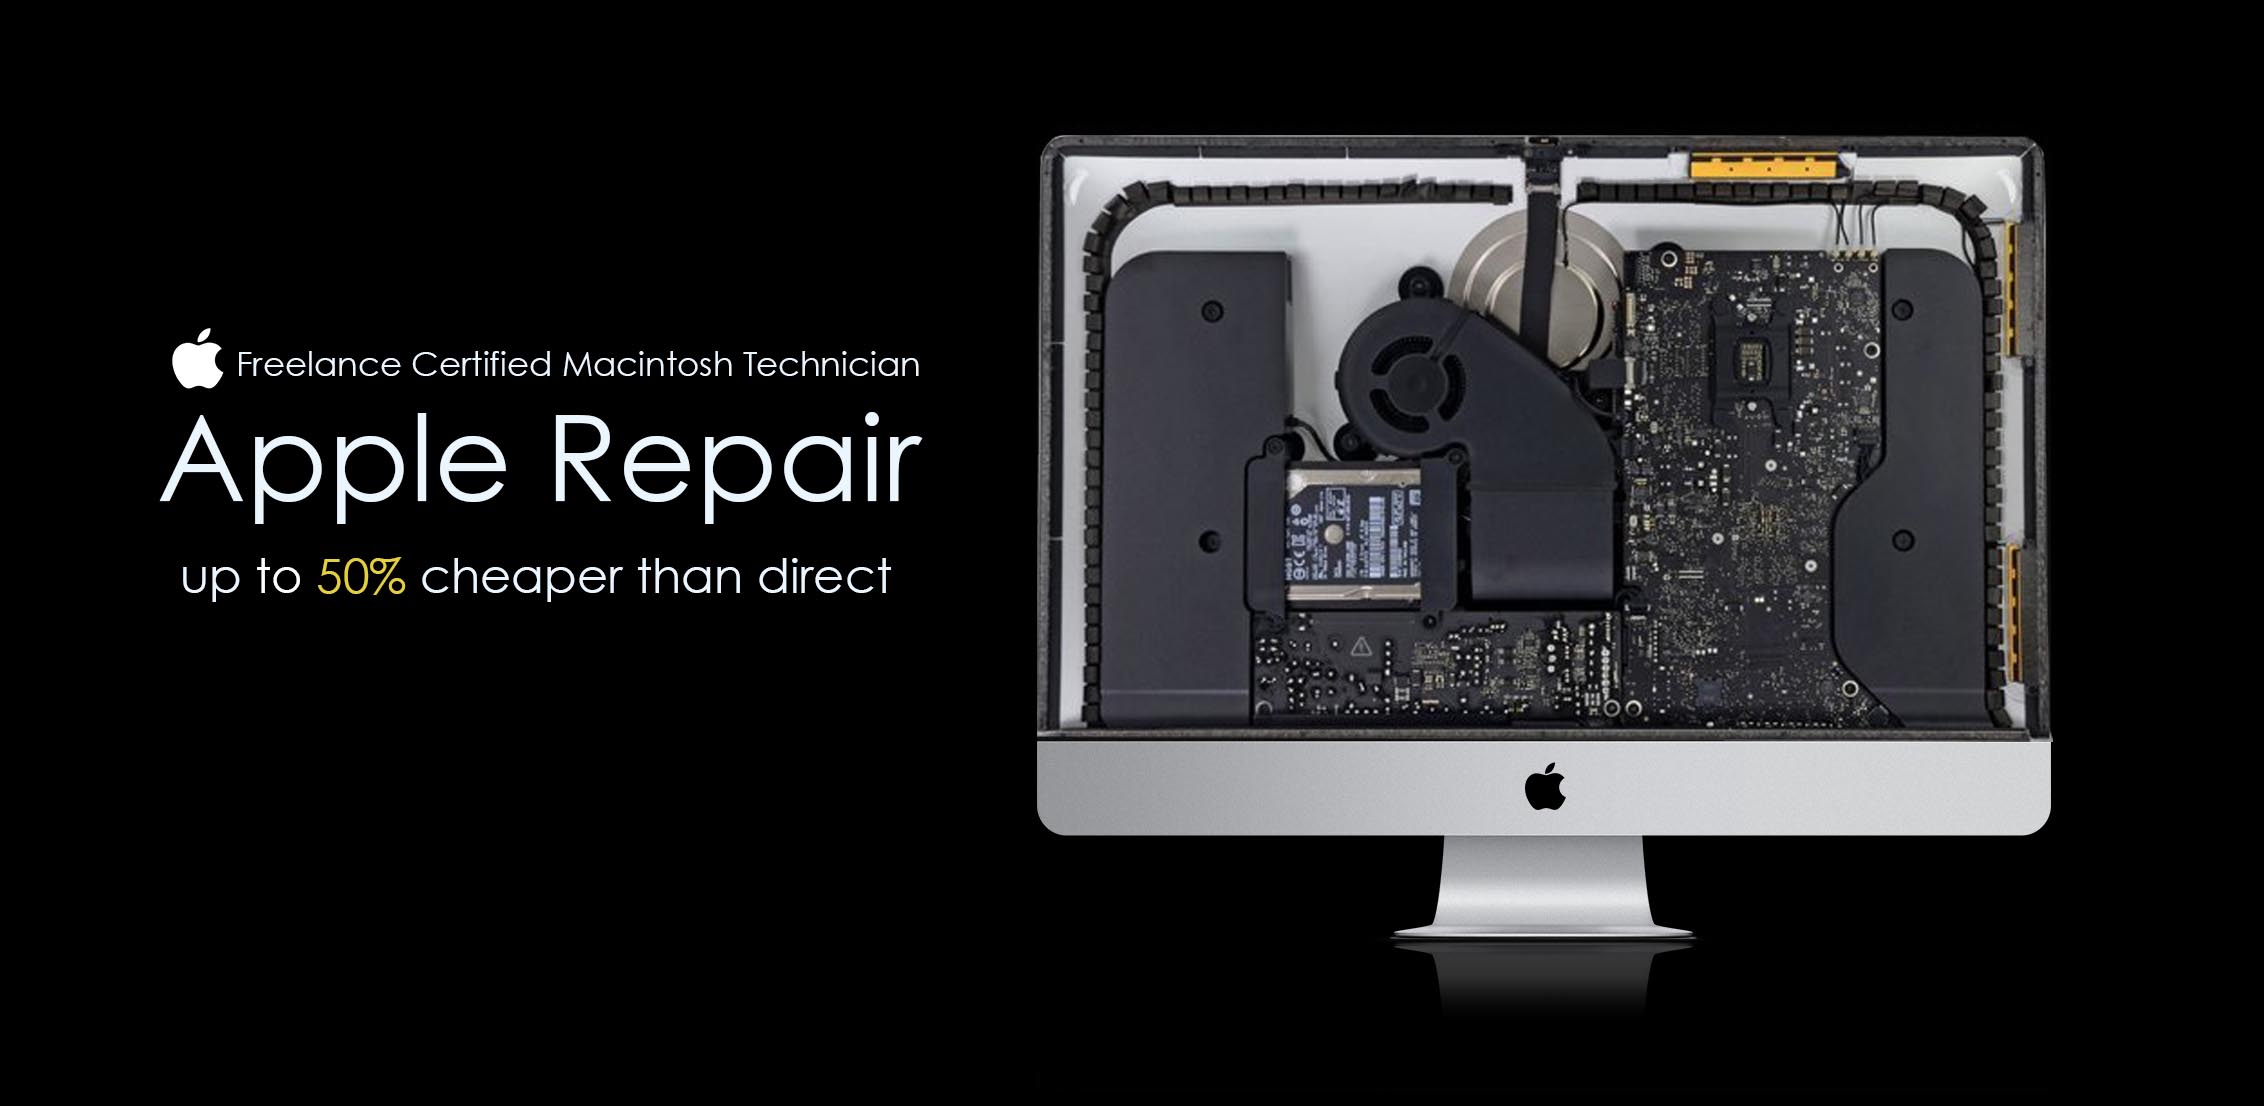 download the new version for apple Complete Internet Repair 11.1.3.6508